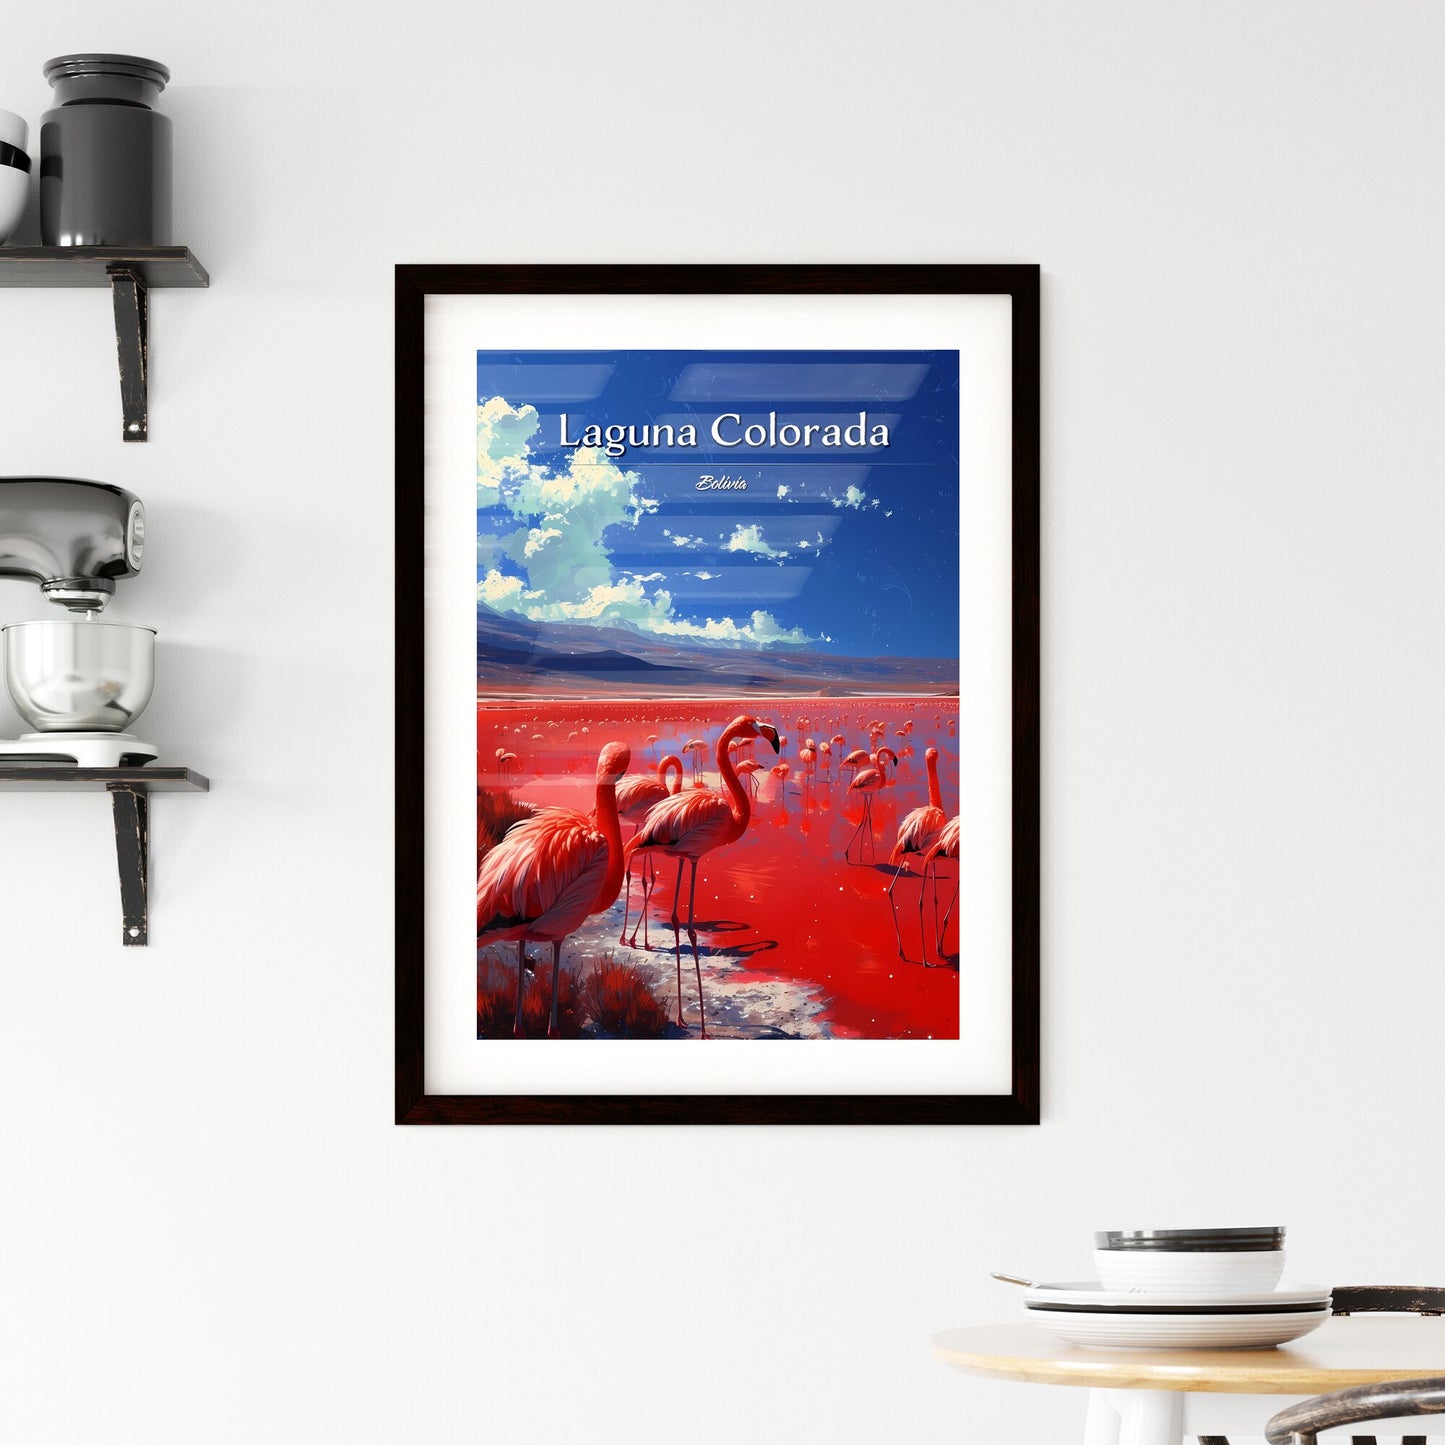 Laguna Colorada, Bolivia - Art print of a group of flamingos in a red lake Default Title